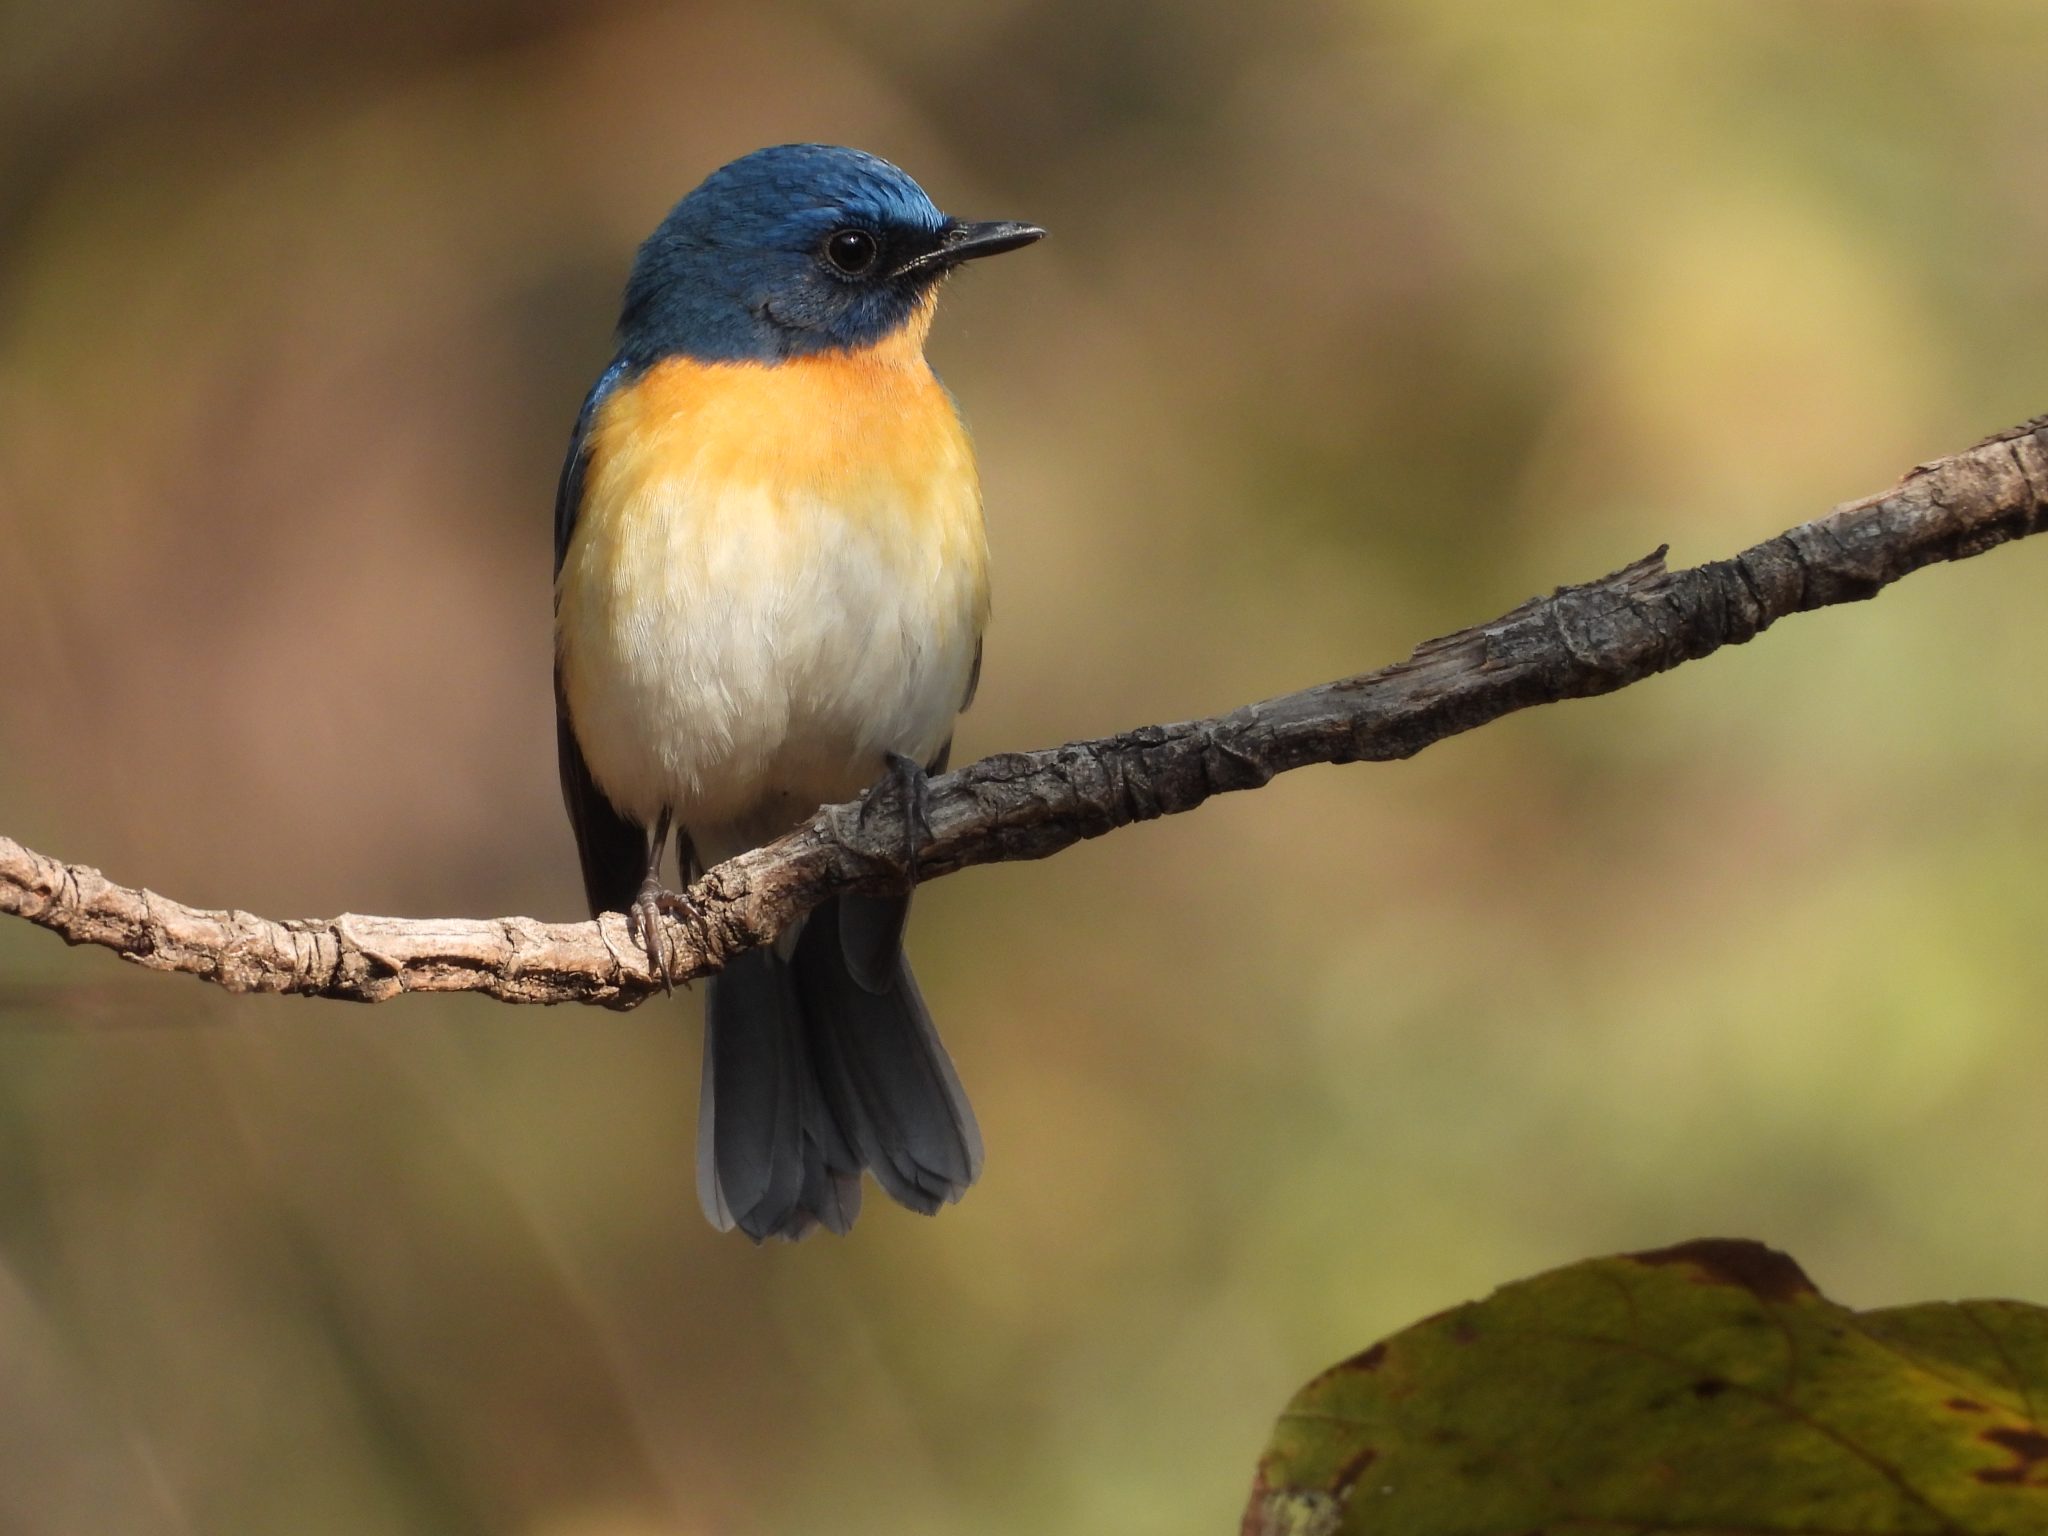 Tickell's Blue Flycatcher perched on a branch. Captured in Nagpur, India.